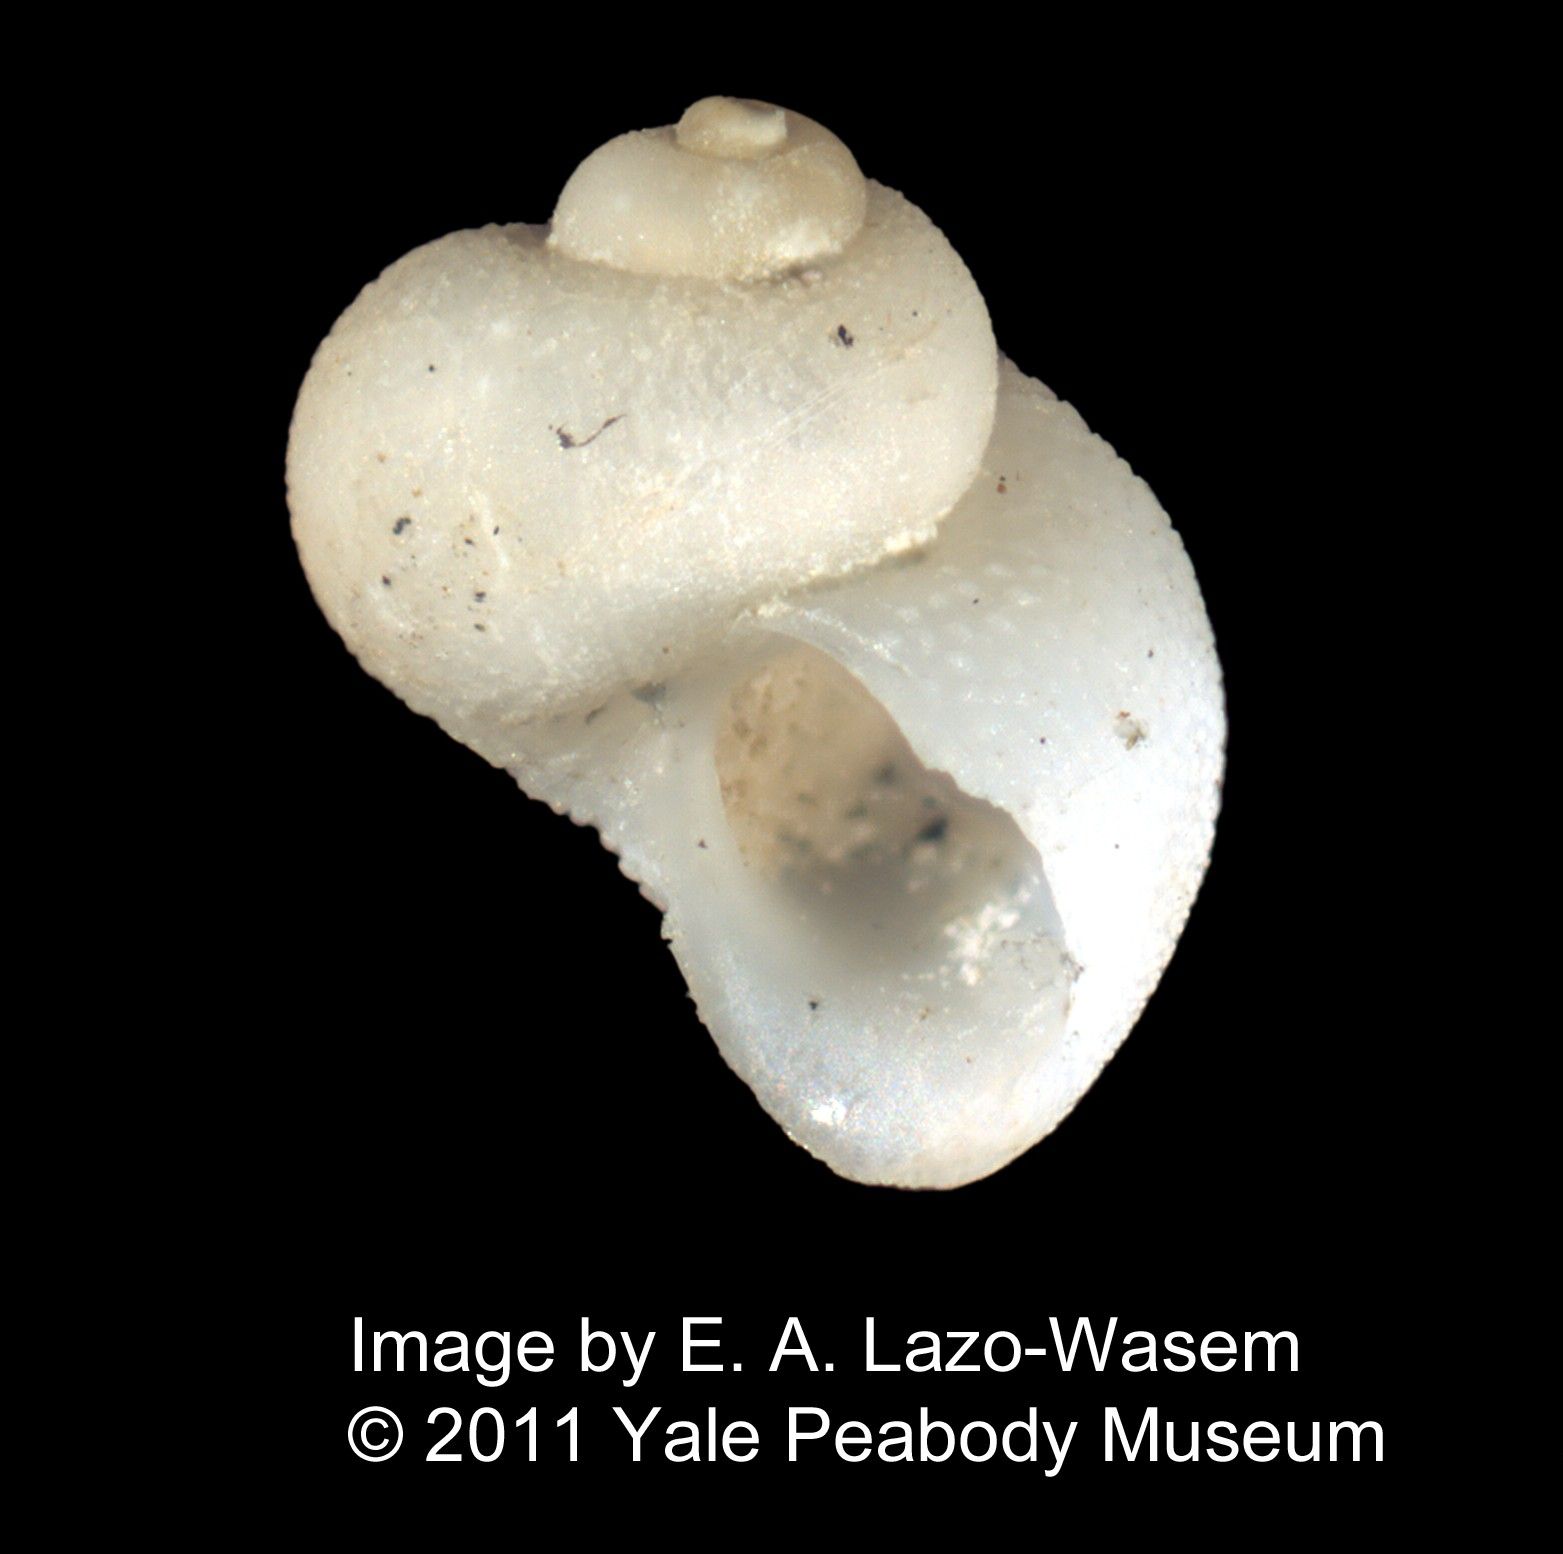 To Yale Peabody Museum of Natural History (YPM IZ 053400)